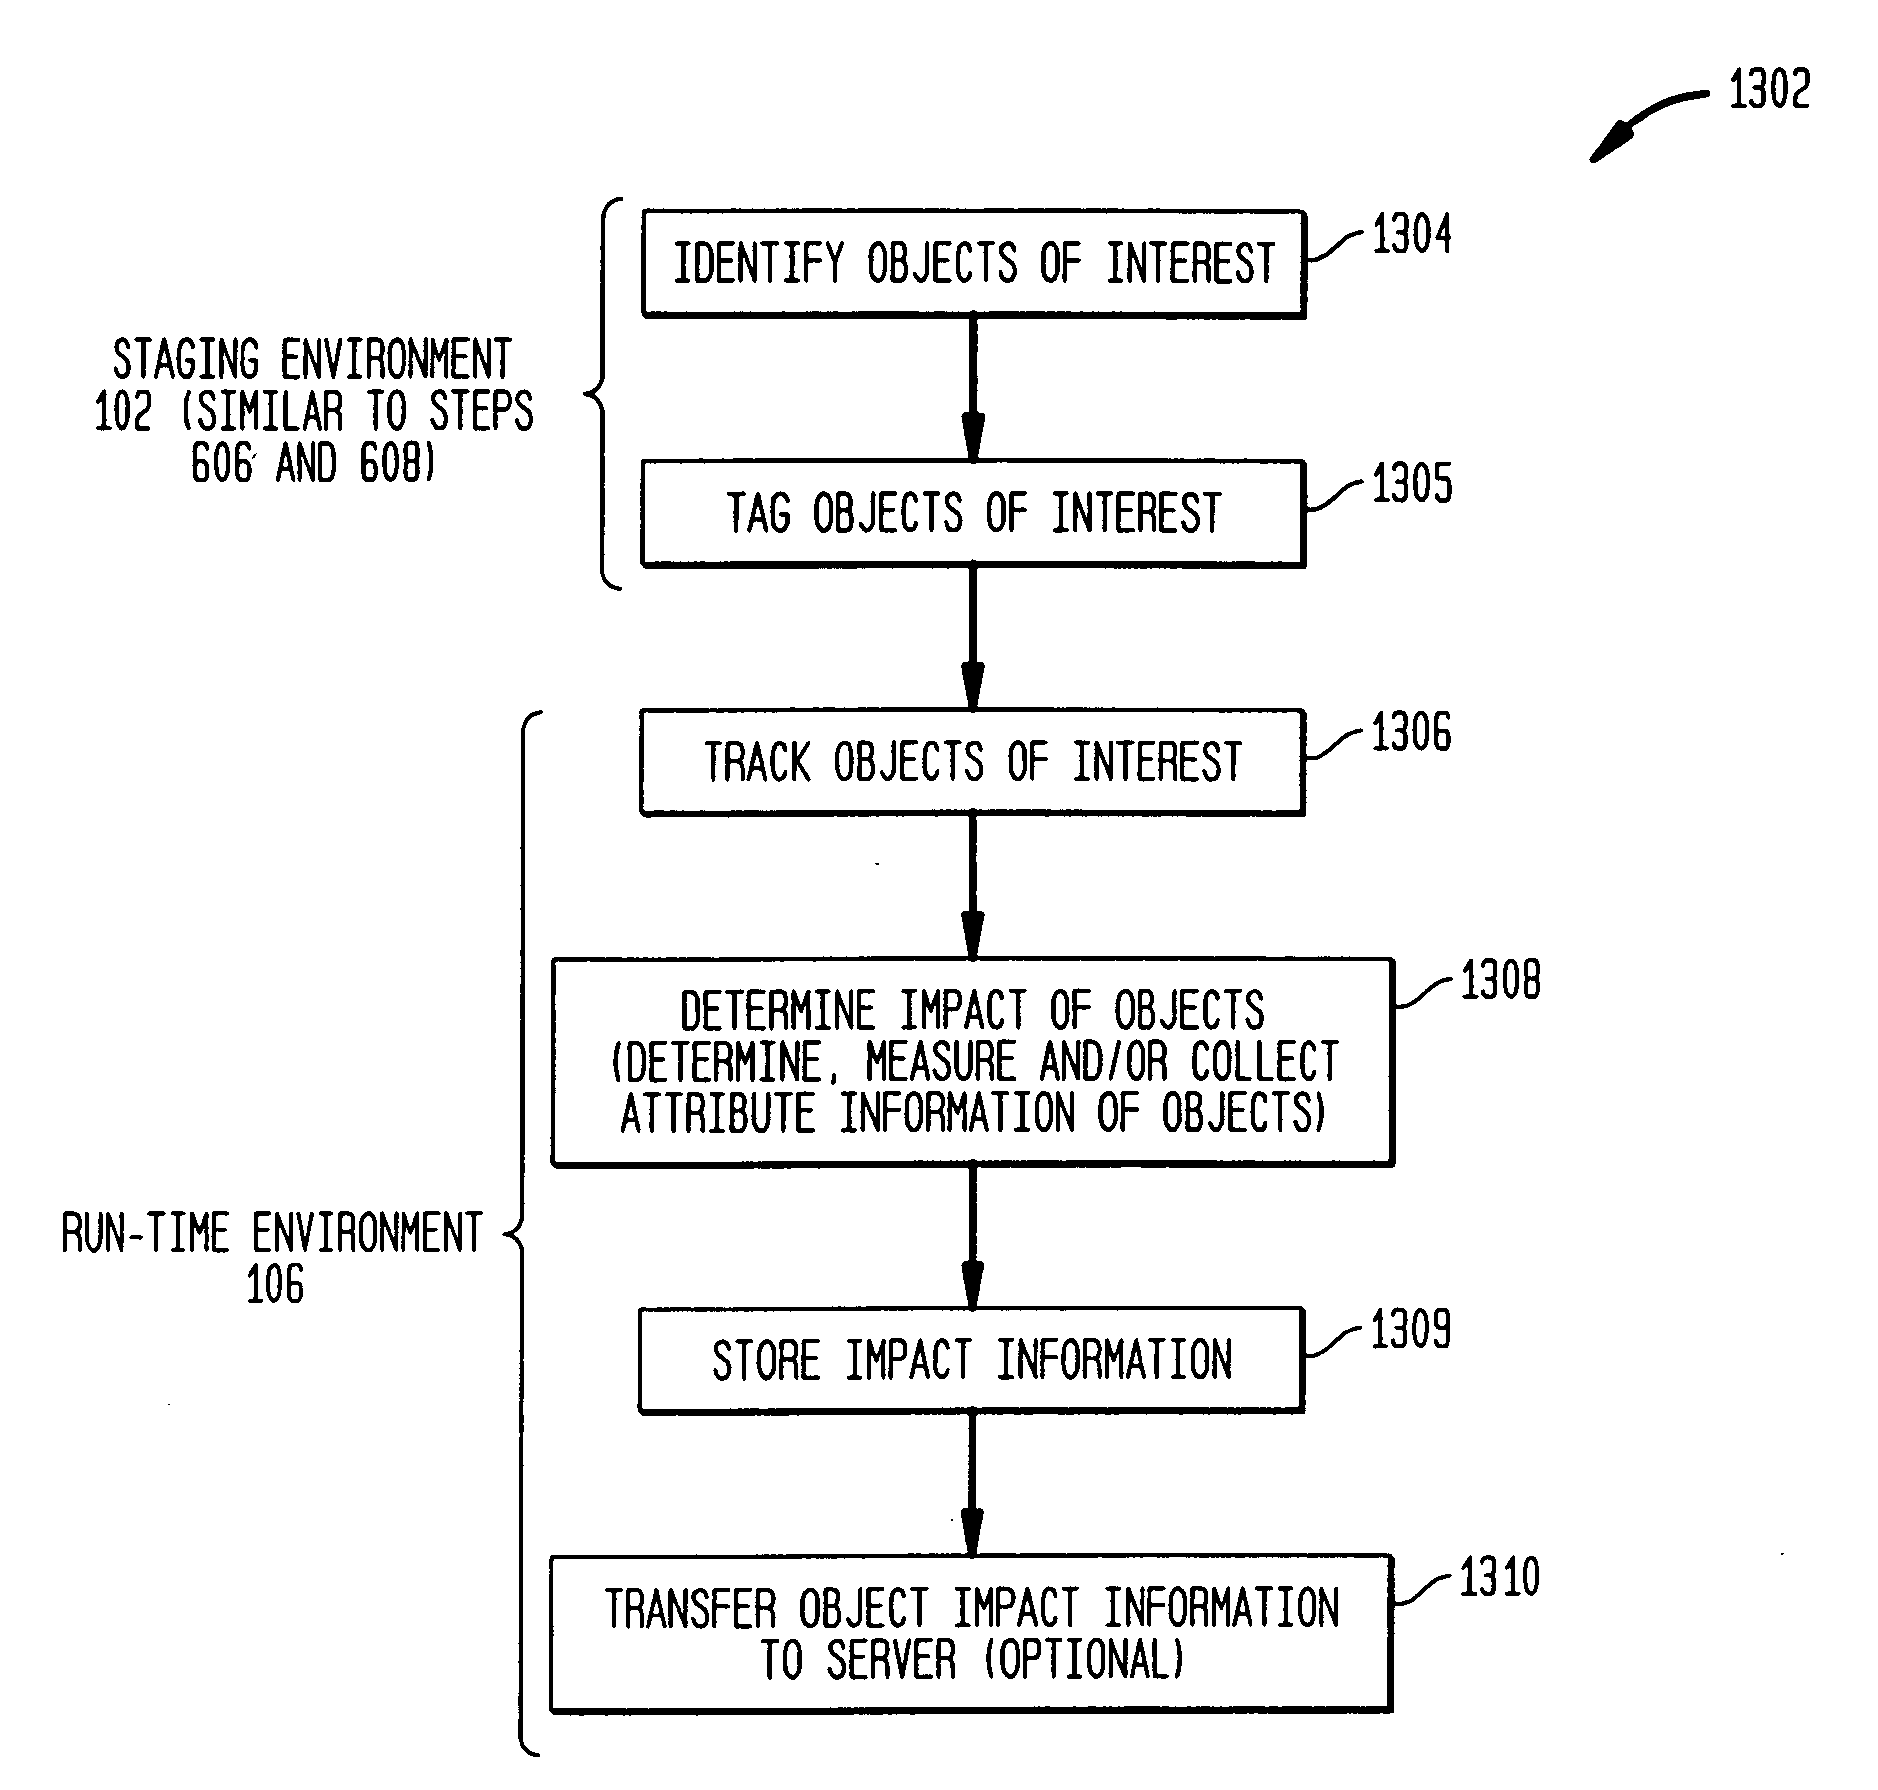 System, method and computer program product for dynamically serving advertisements in an executing computer game based on the entity having jurisdiction over the advertising space in the game